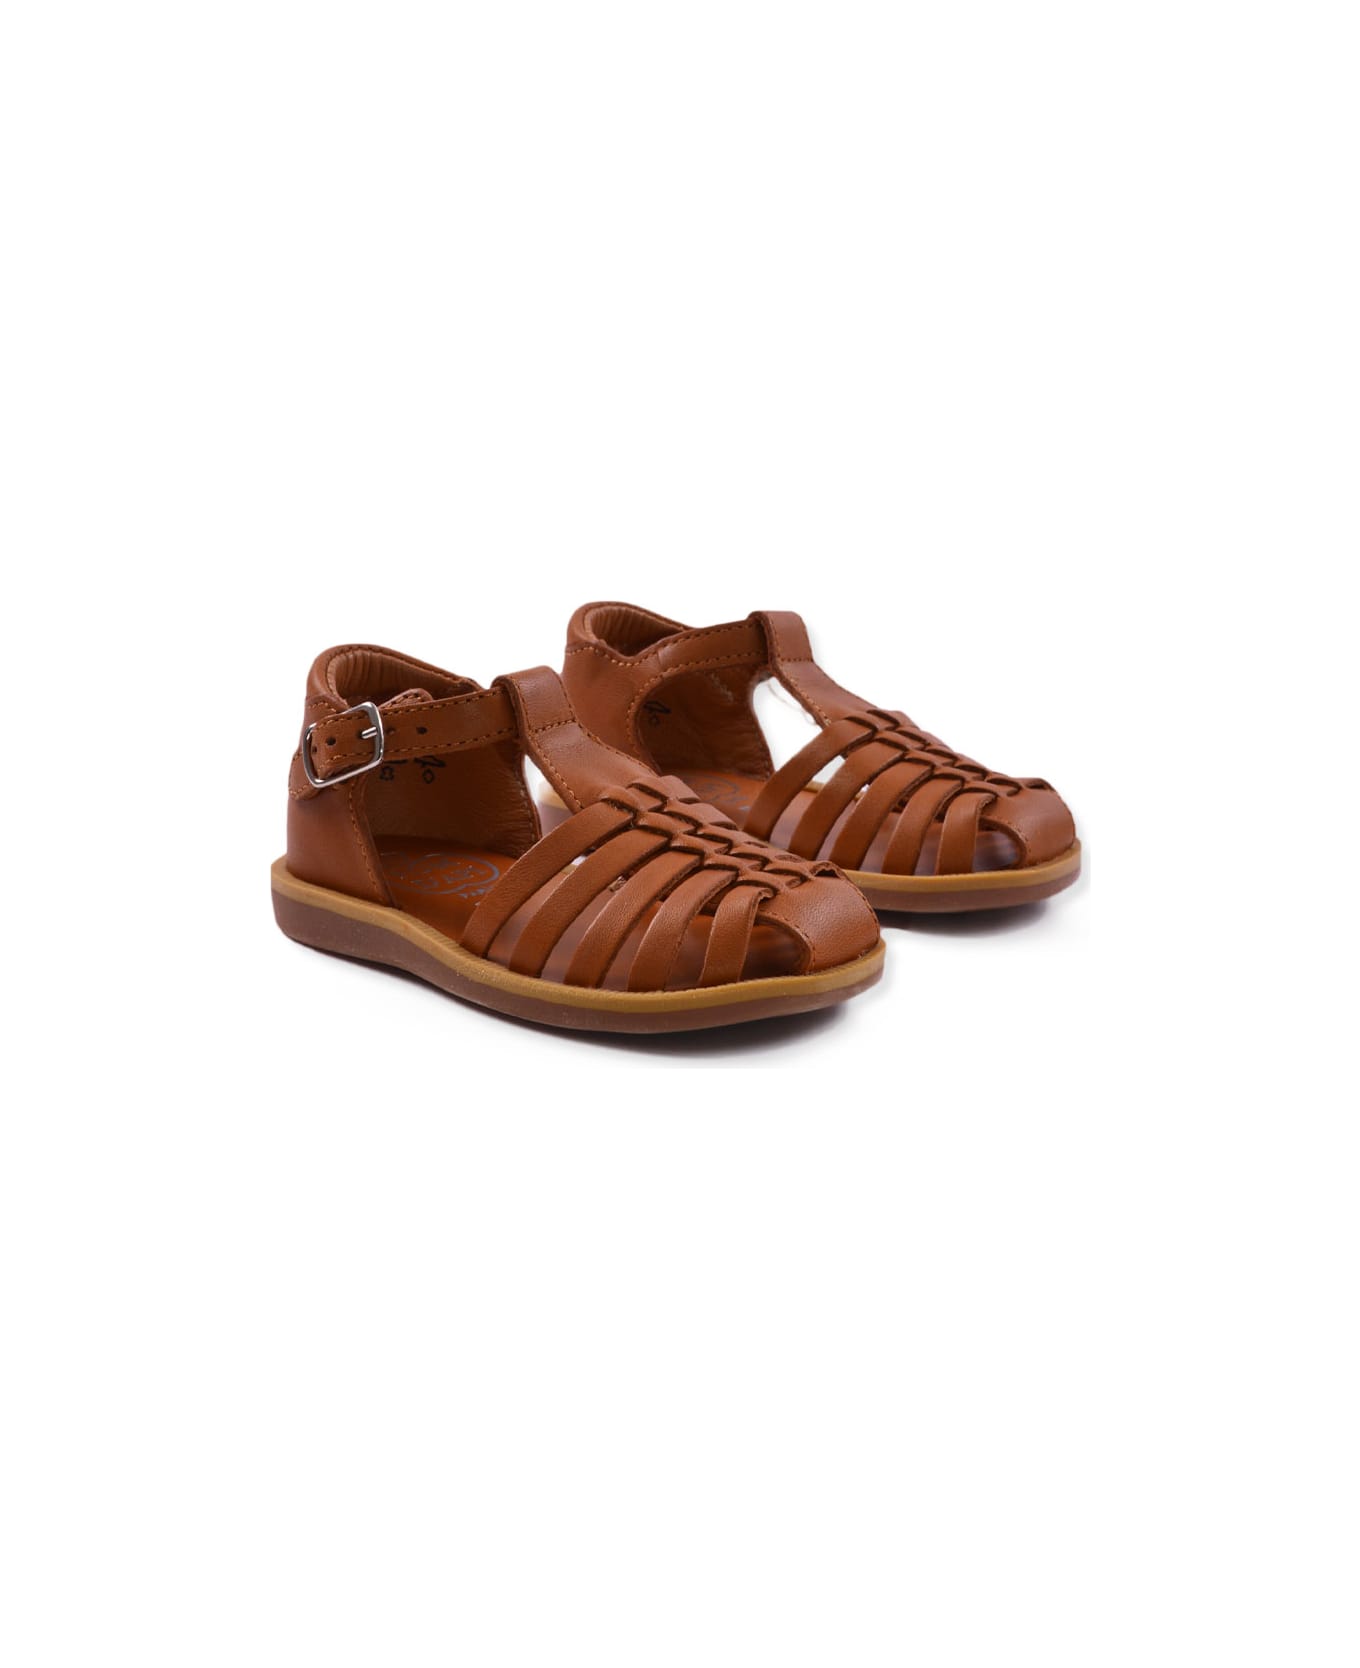 Pom d'Api Sandals In Smooth Leather - Brown シューズ